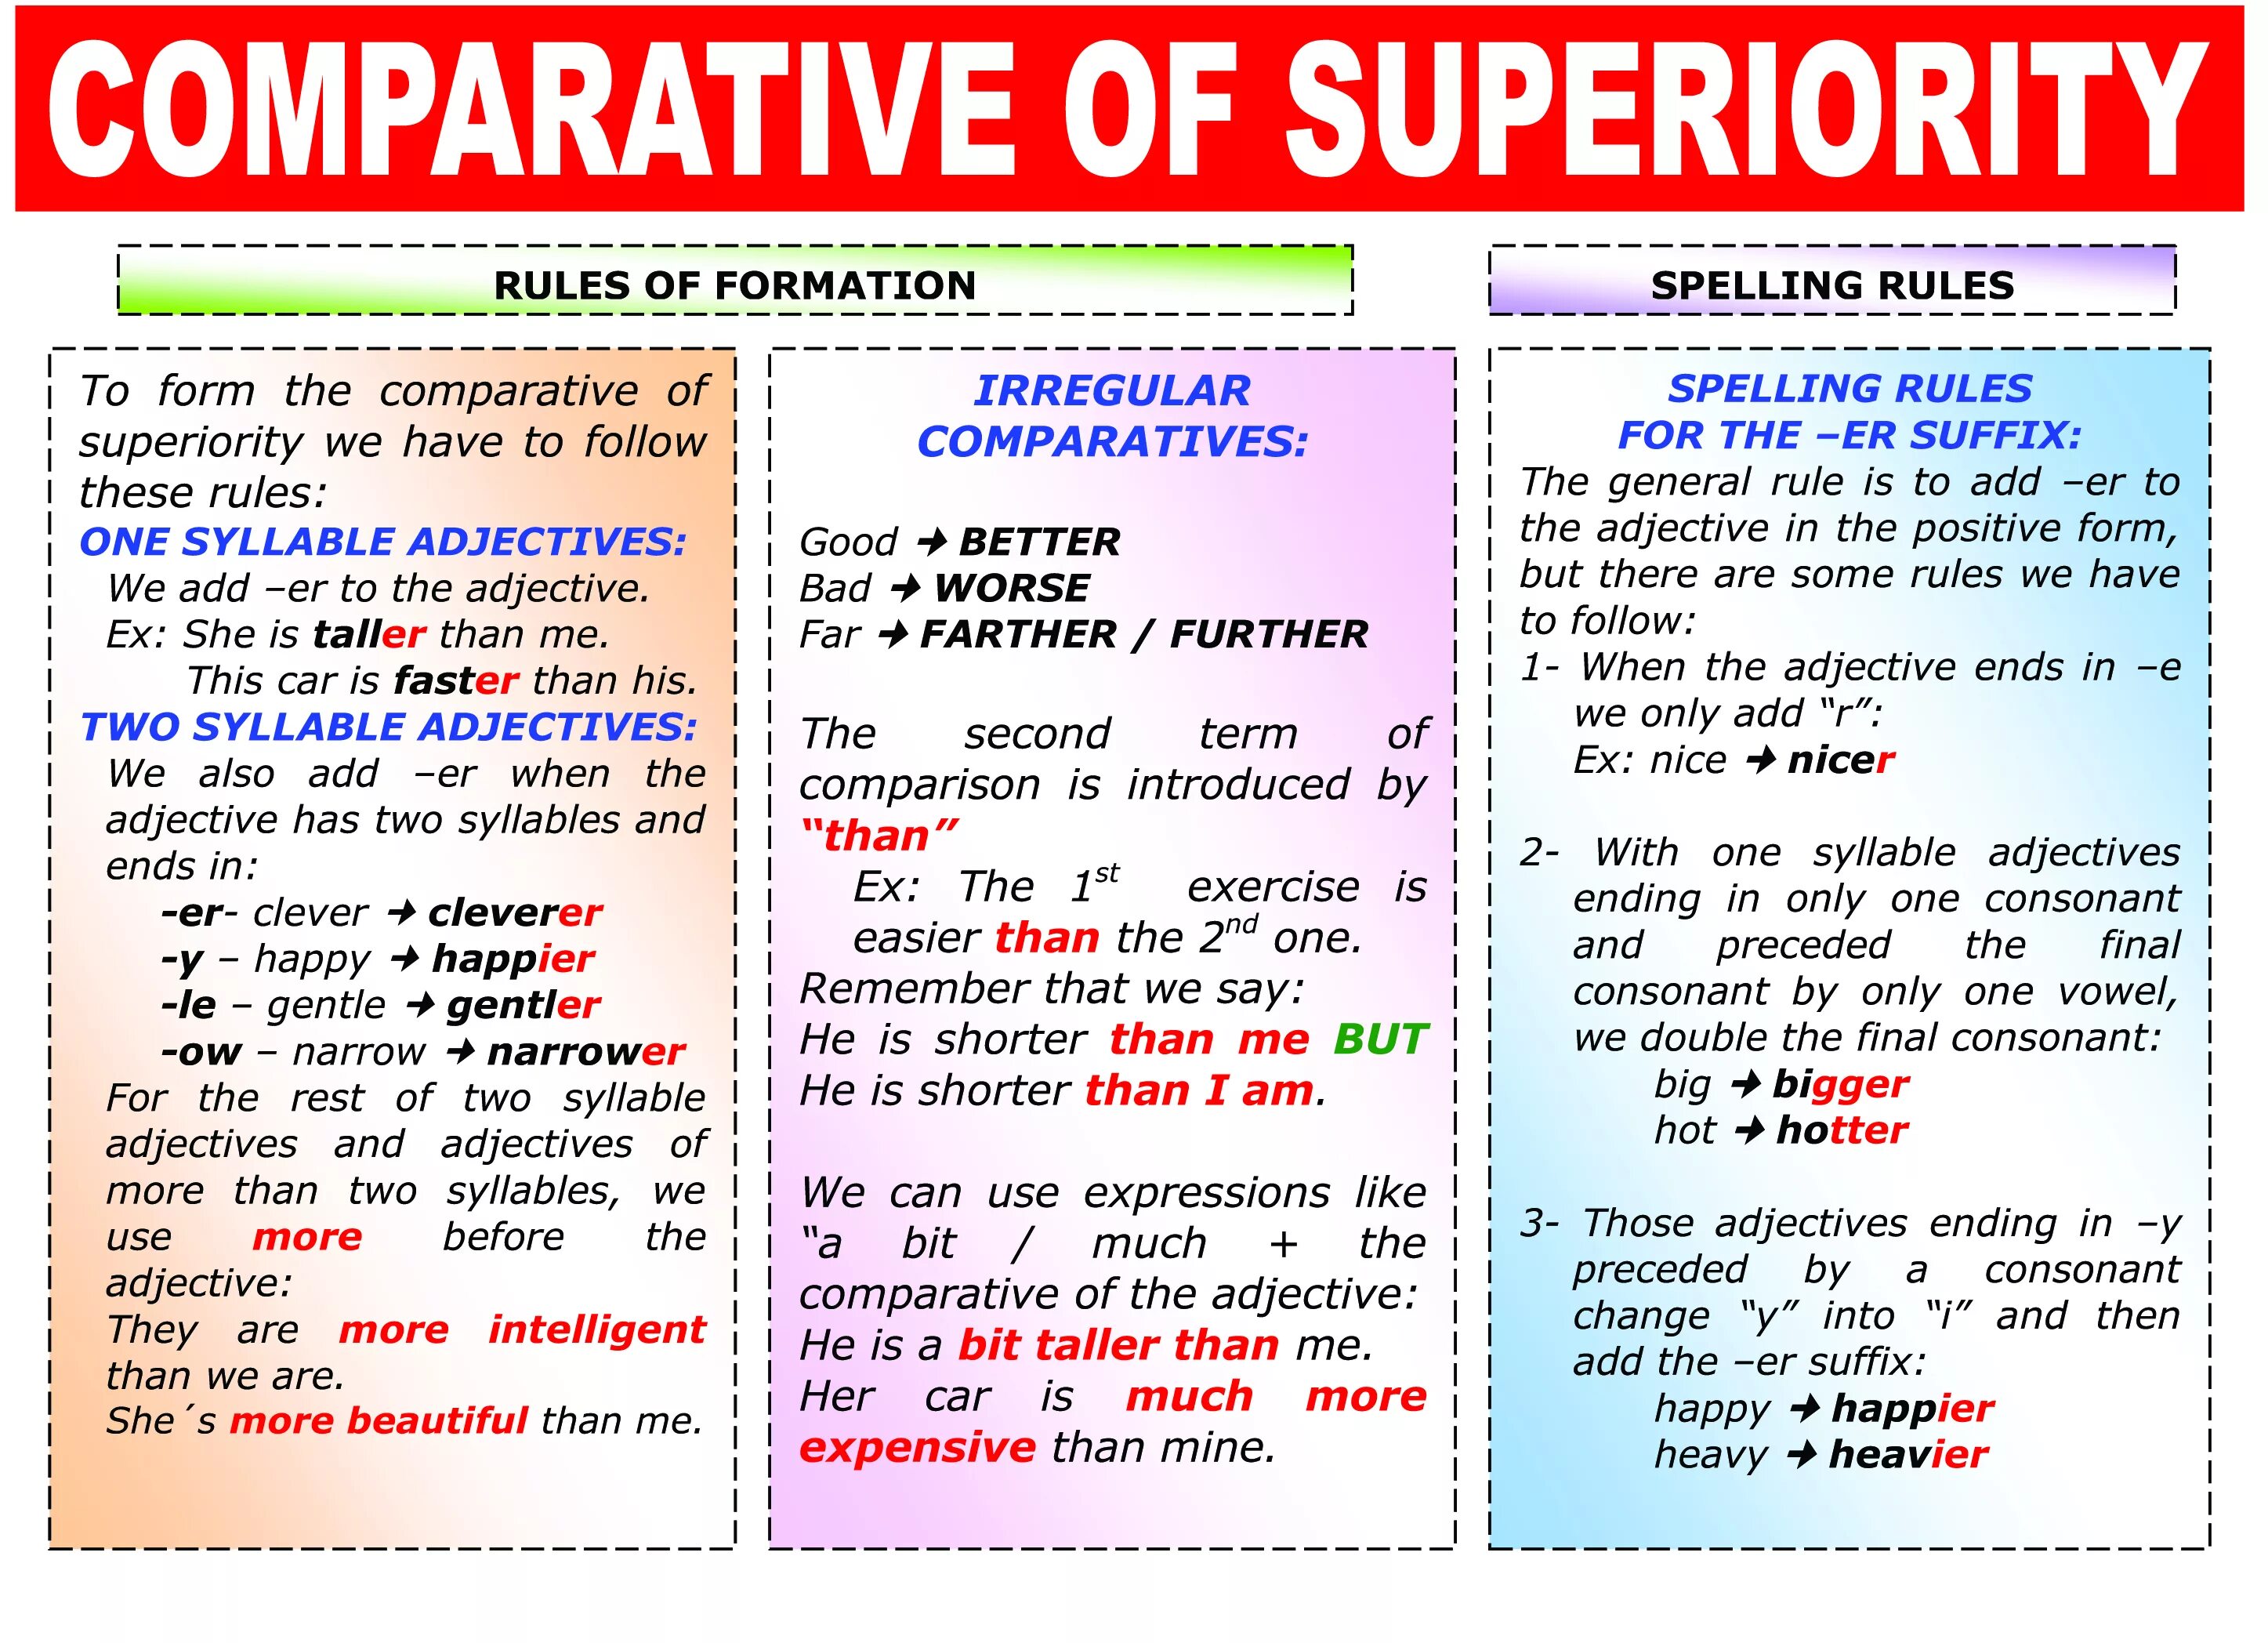 Comparative of superiority. Comparisons правило. Comparative adjectives Rule. Spelling Rules adjectives. Comparative правило